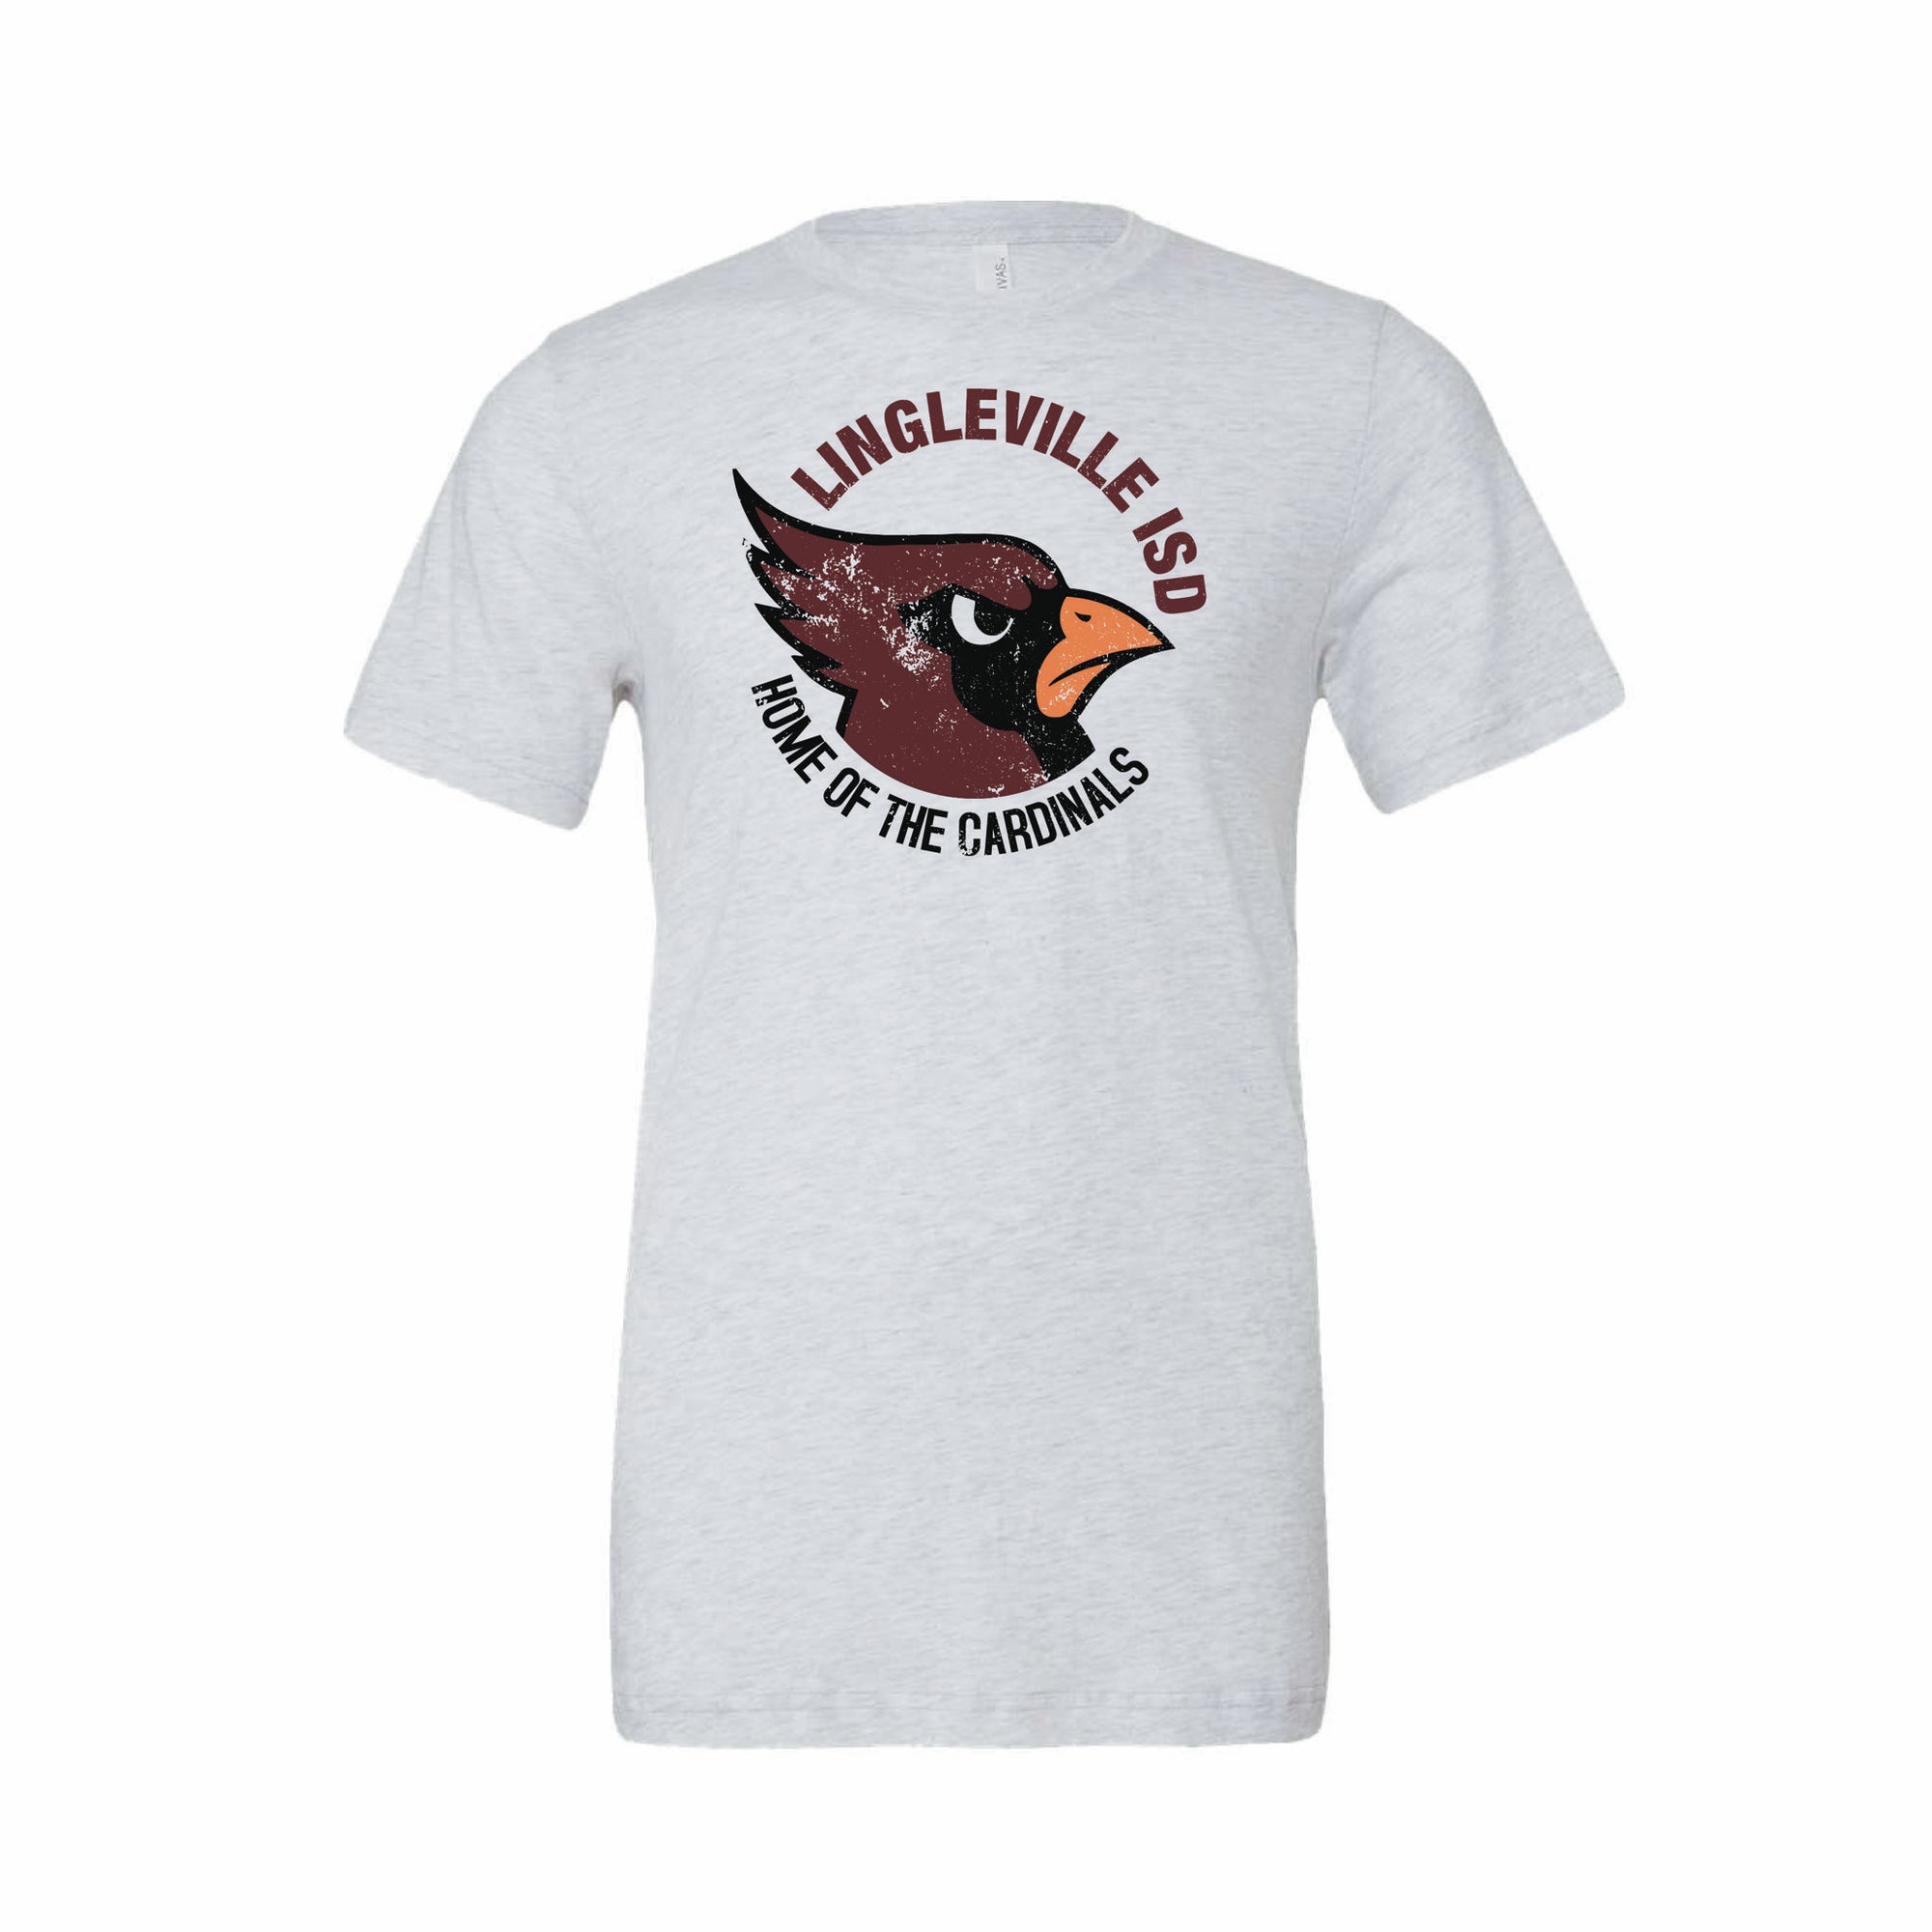 Home of the Cardinals Distressed Tee